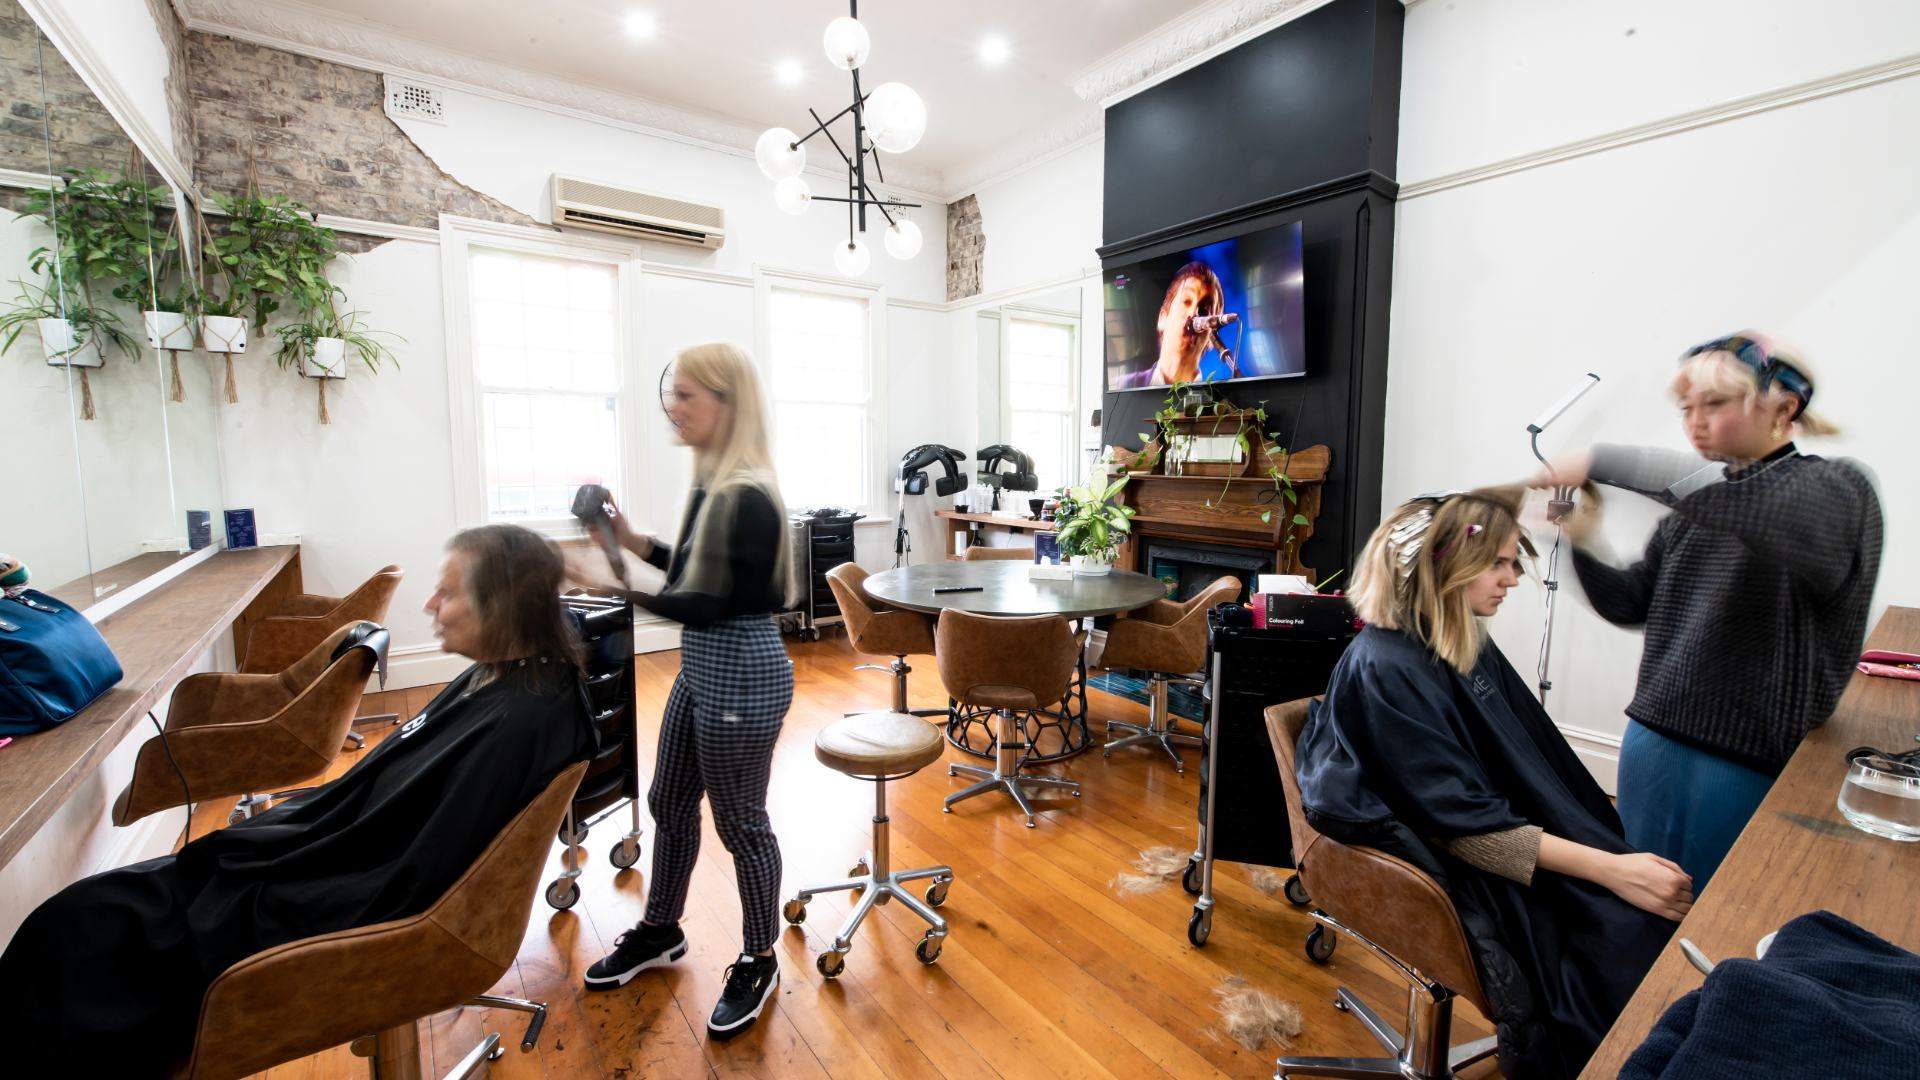 Sydney Hair Salons And Barbershops For When You Want To Look Your Best Concrete Playground